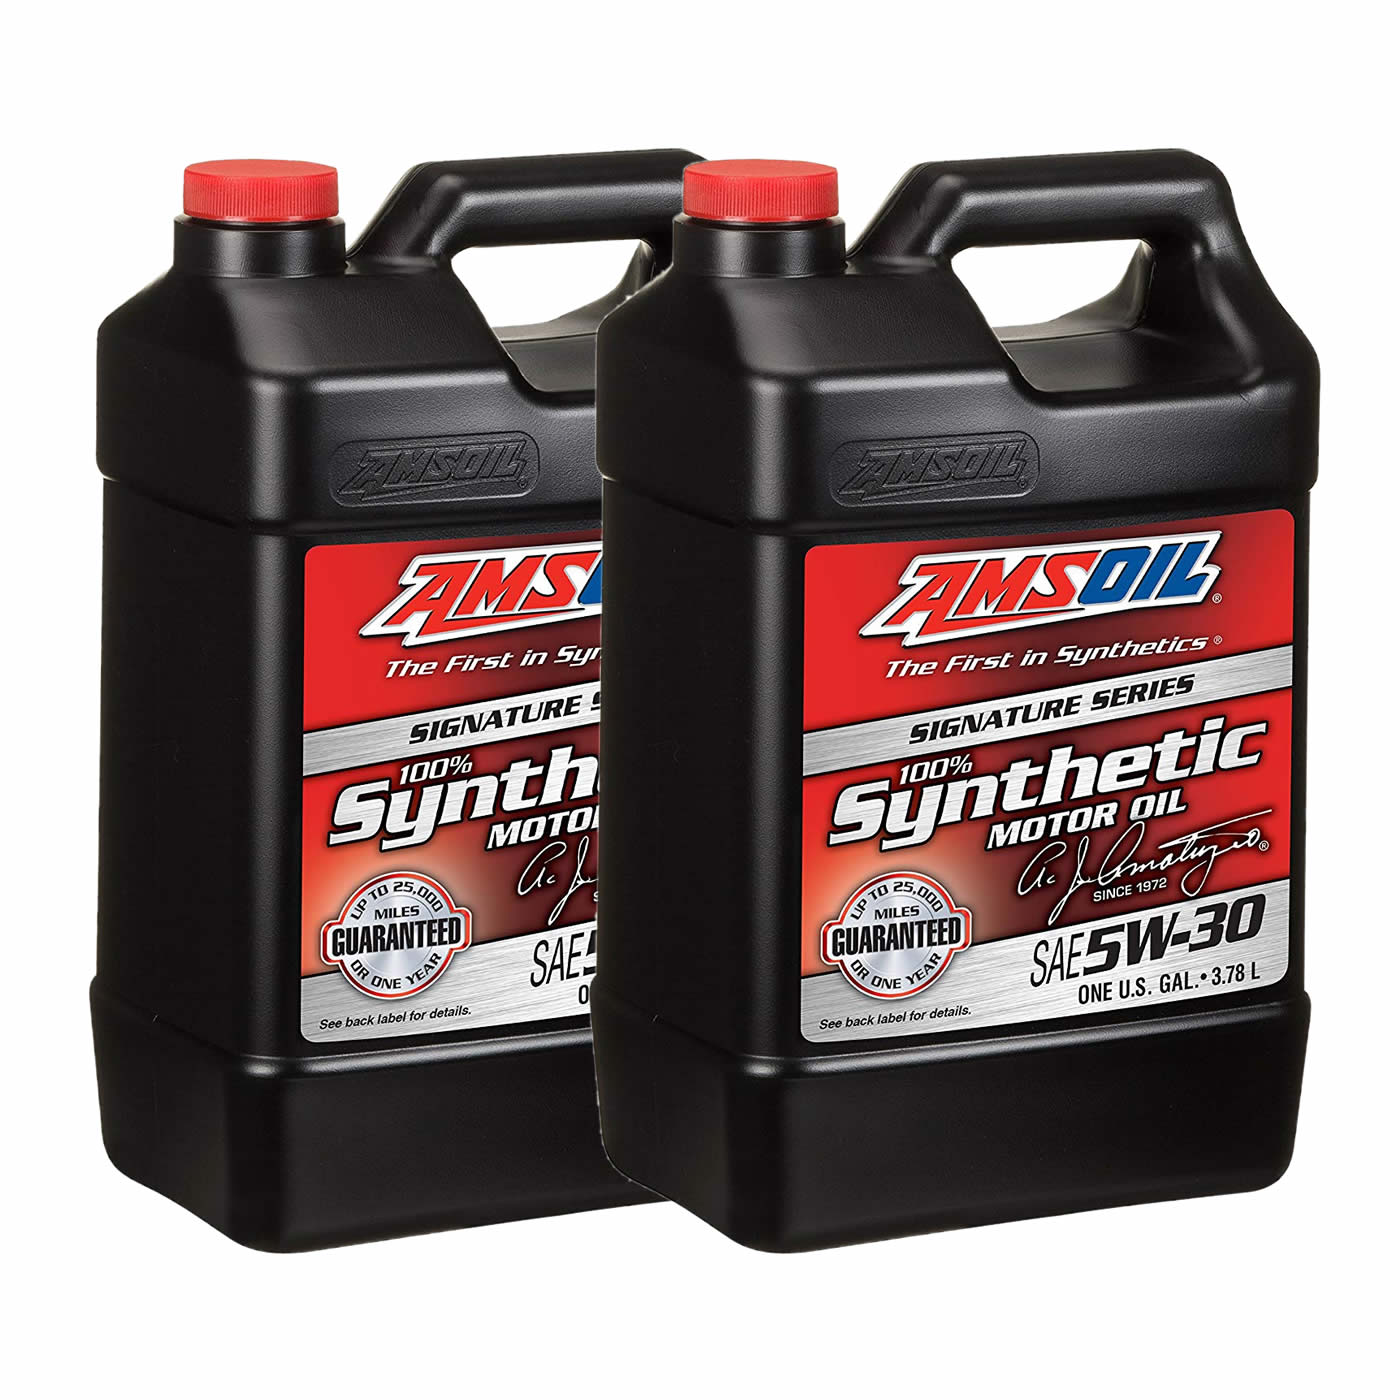 Amsoil signature series synthetic. AMSOIL 5w30. AMSOIL Signature Series 5w-30. АМСОИЛ масло 5w30. AMSOIL 5w40 Diesel.